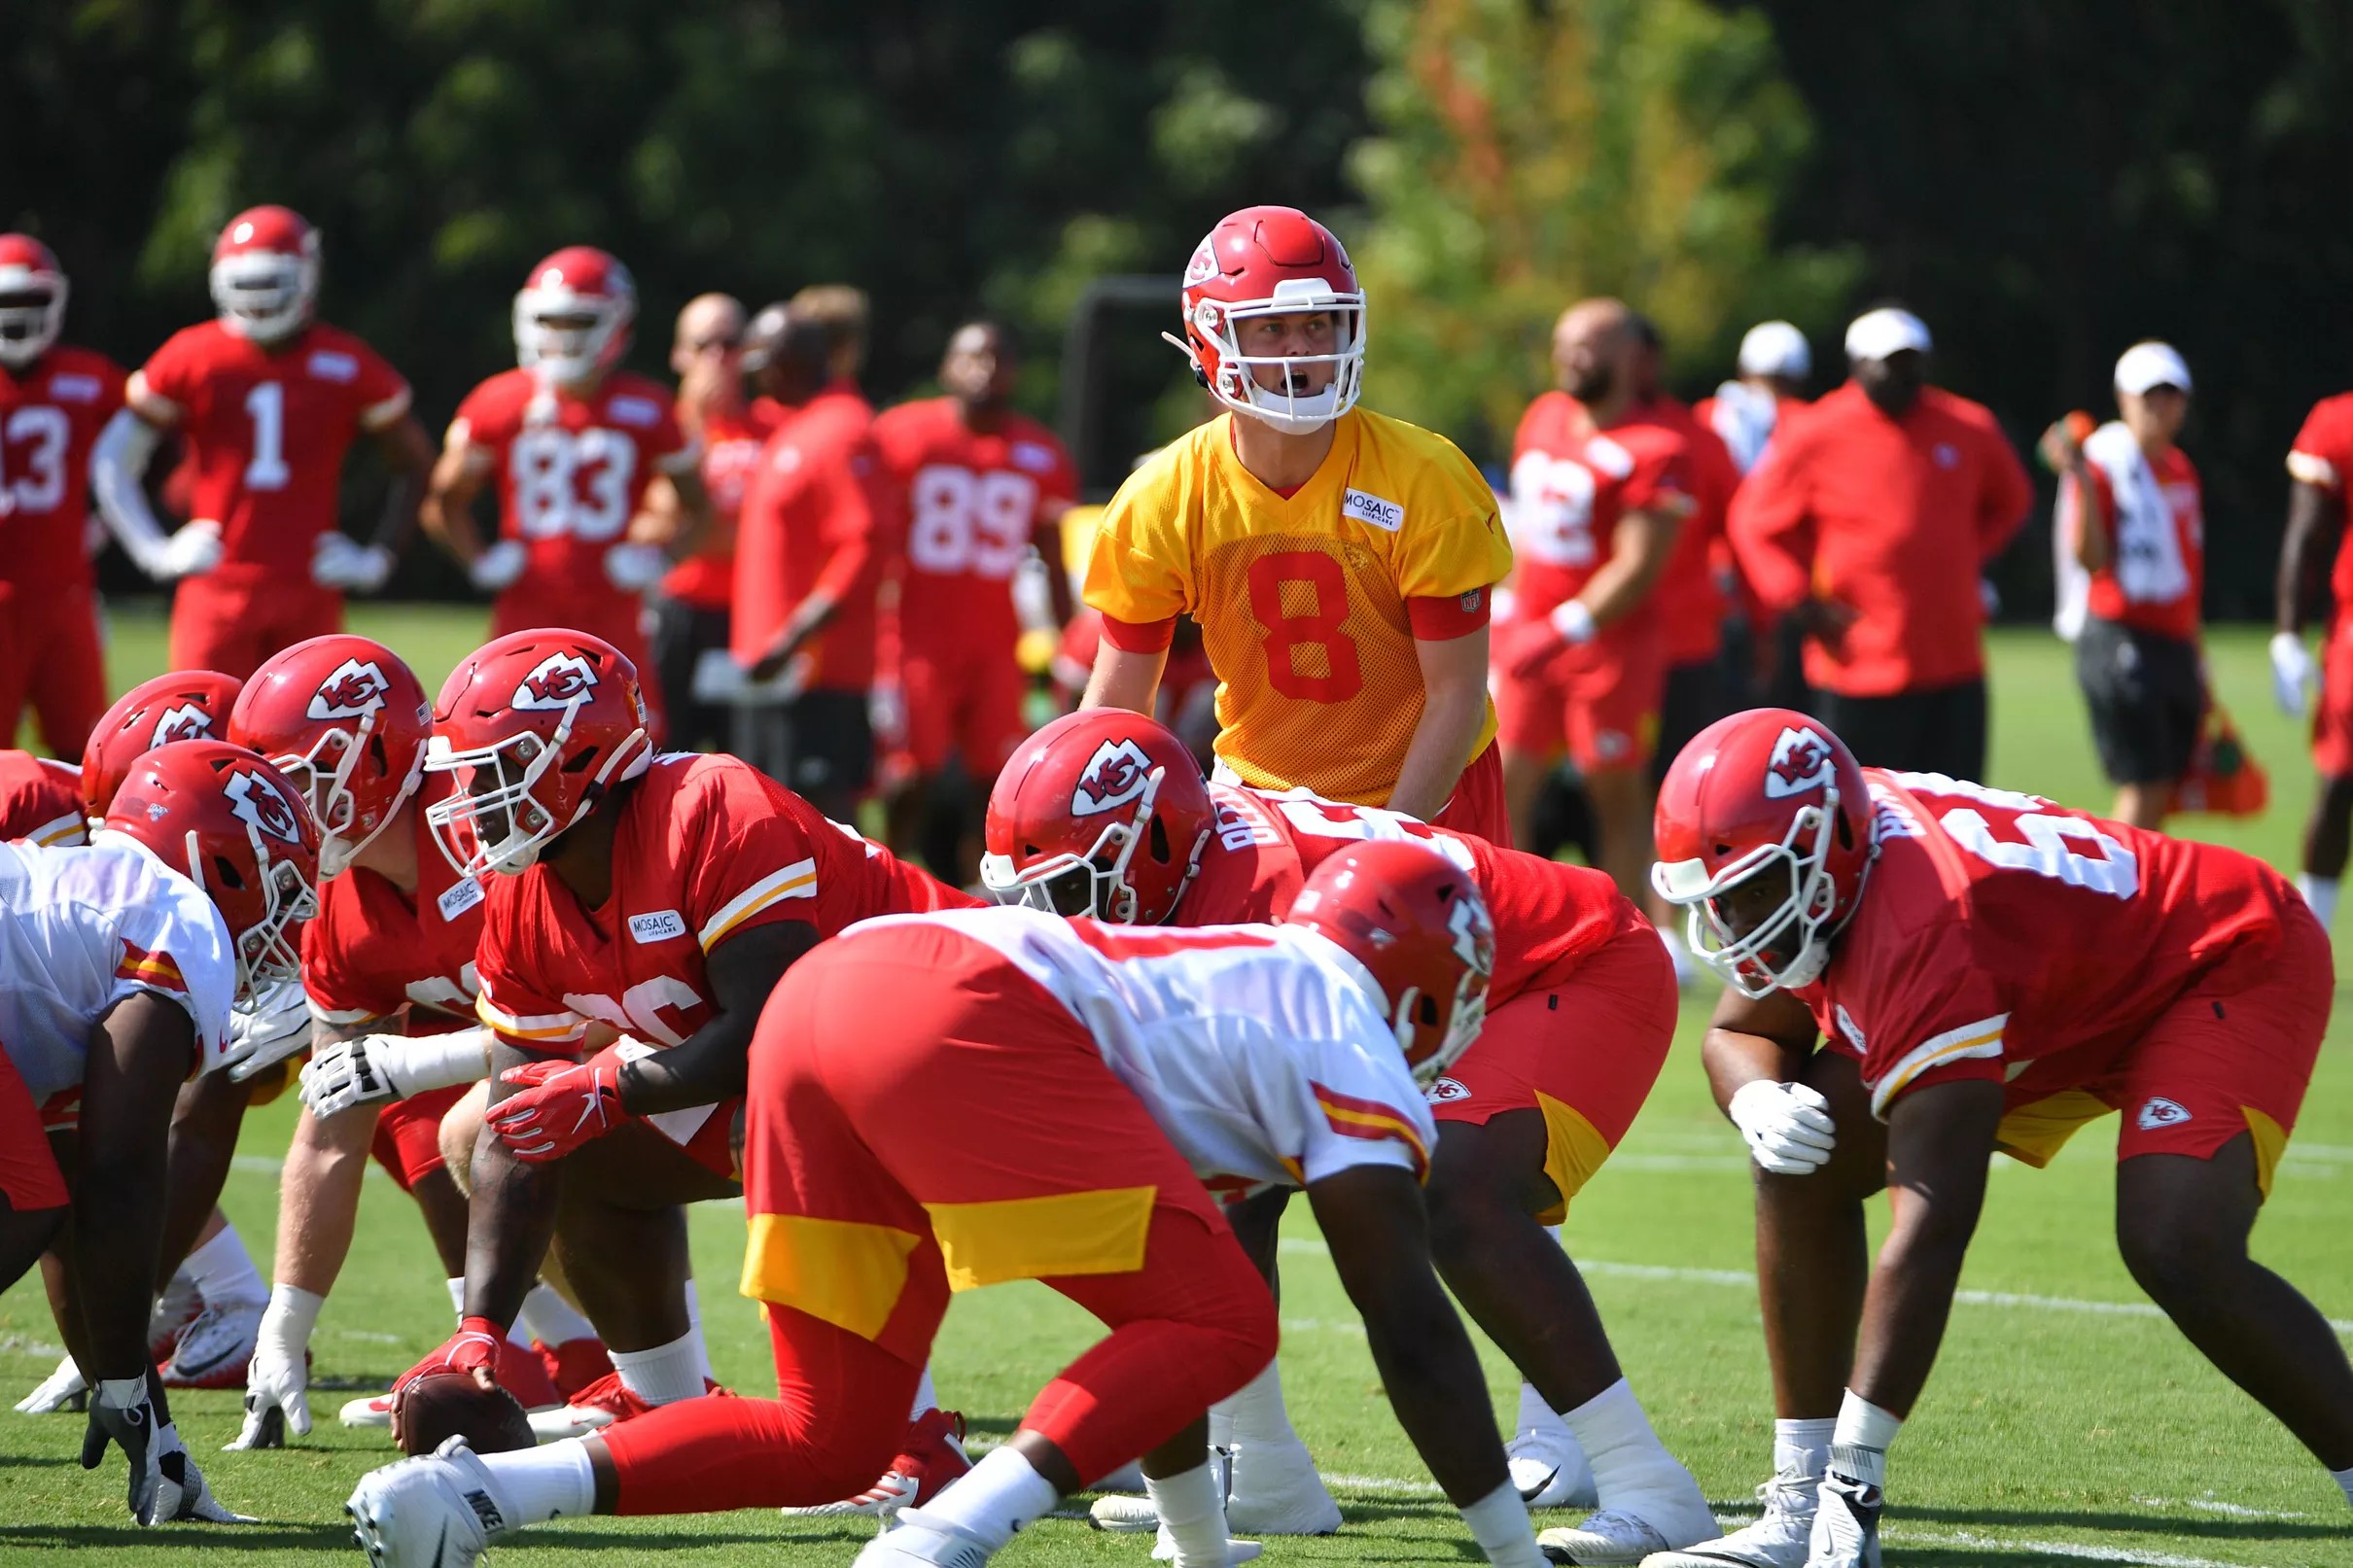 Live updates for Chiefs training camp practice July 30, 2019